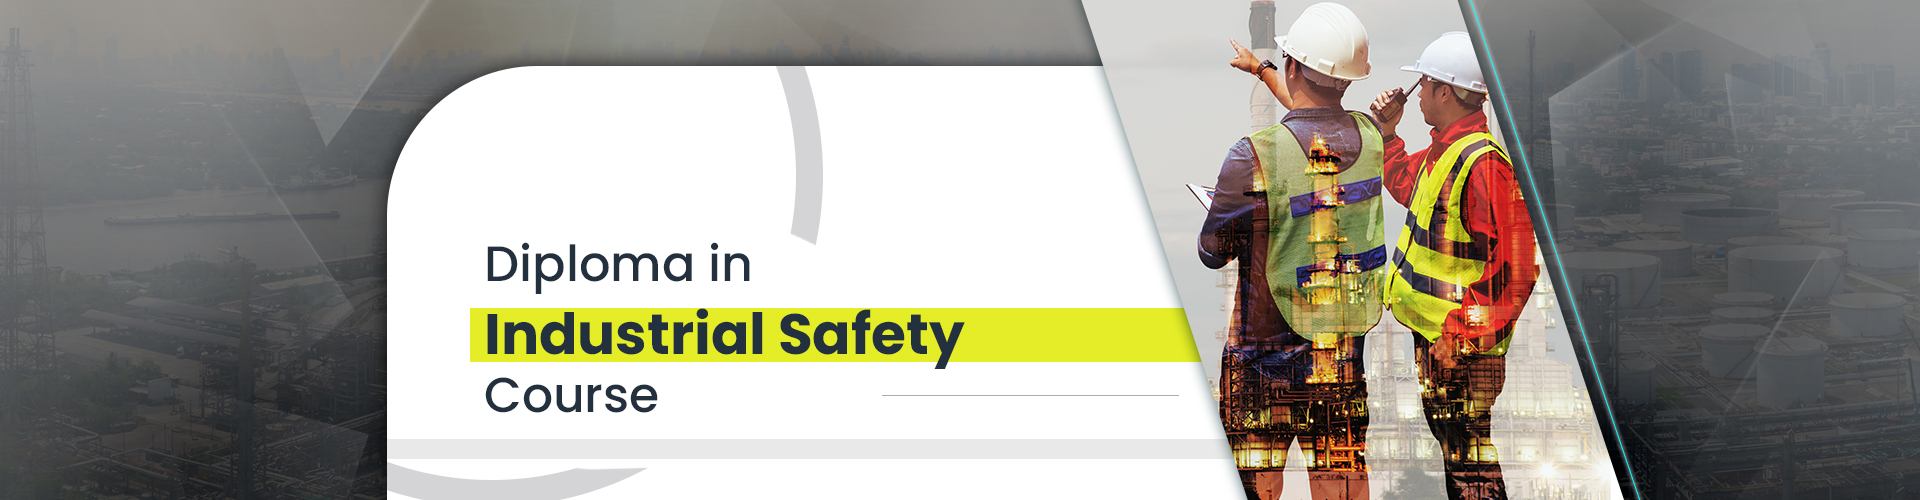 Advanced Diploma in Industrial Safety